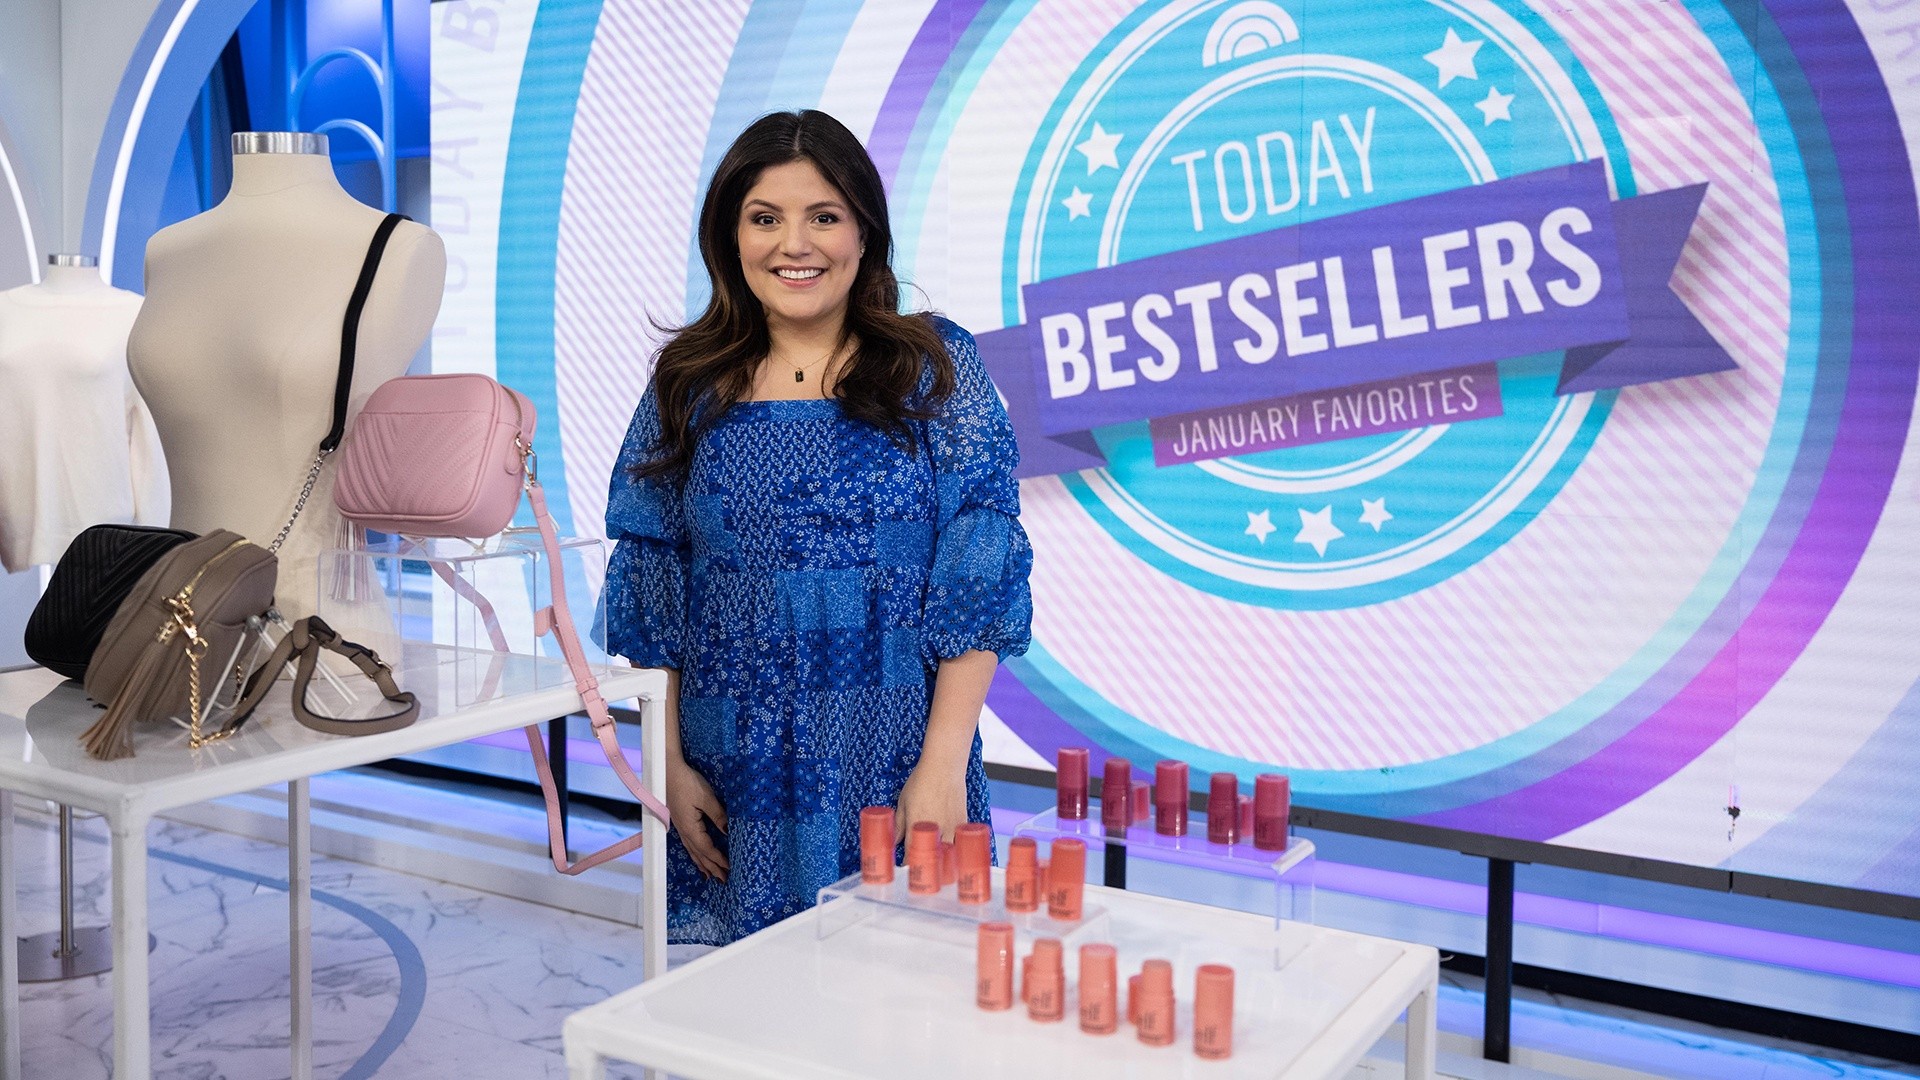 🧖‍♀️Wake up with #TYMO Featured in The Today Show Bestsellers